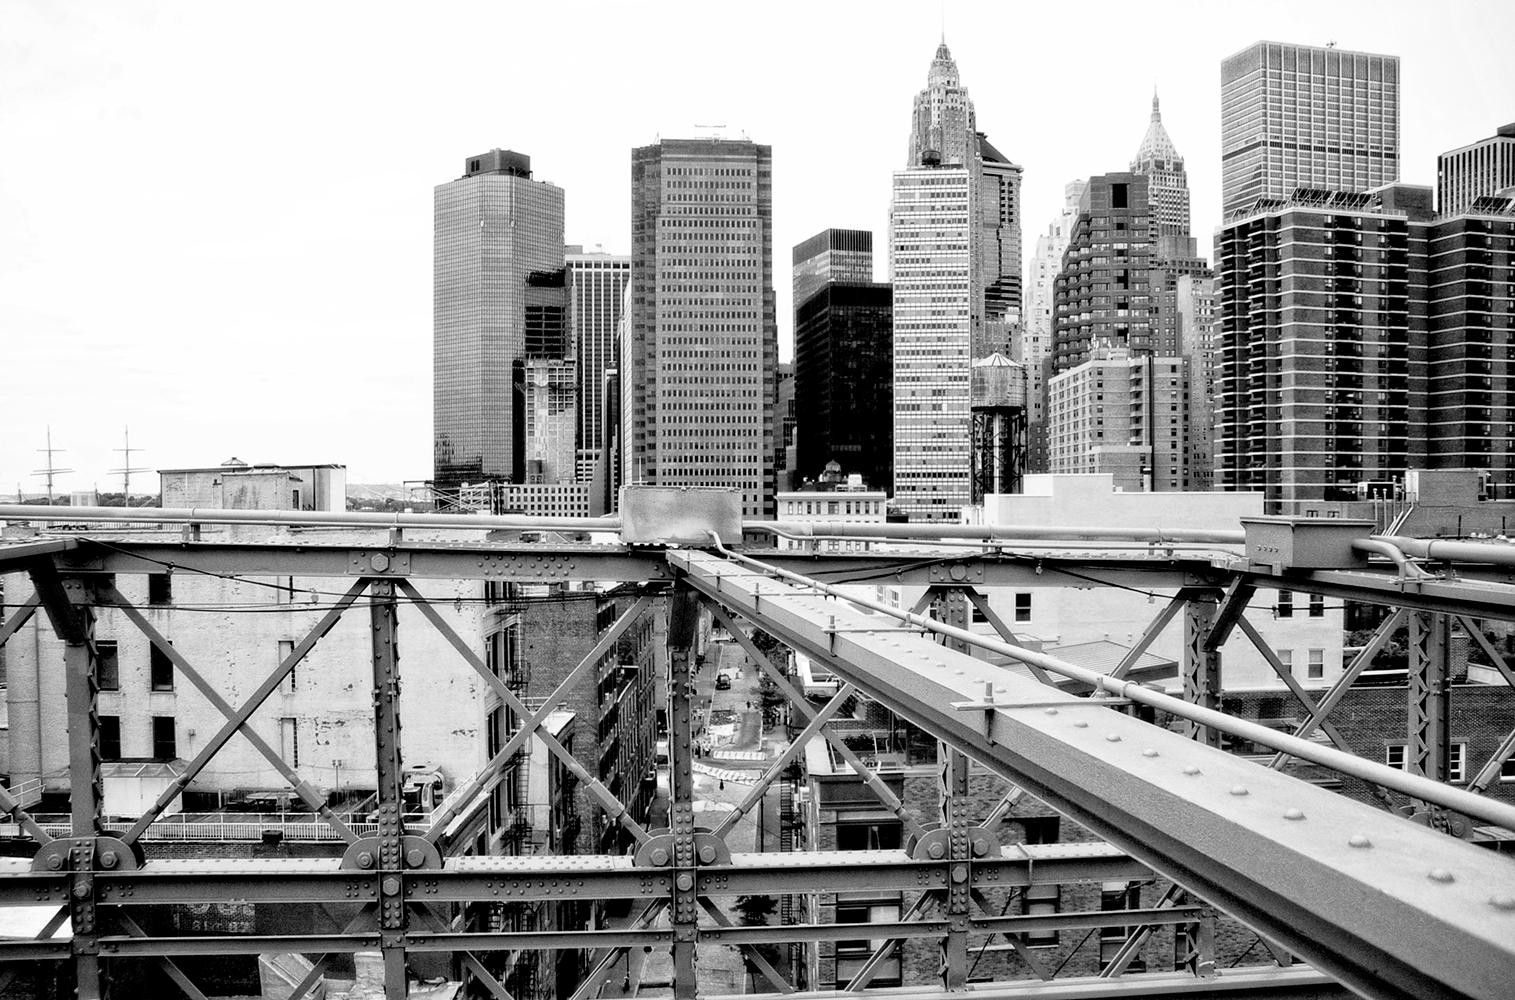 View From The Bridge

A view of New York City from the Brooklyn Bridge, New York.

by Stuart Möller

Born in Kabul, part German and Anglo-Indian and having grown up all over the world,
Stuart Möller is a fine art photographer whose images are often